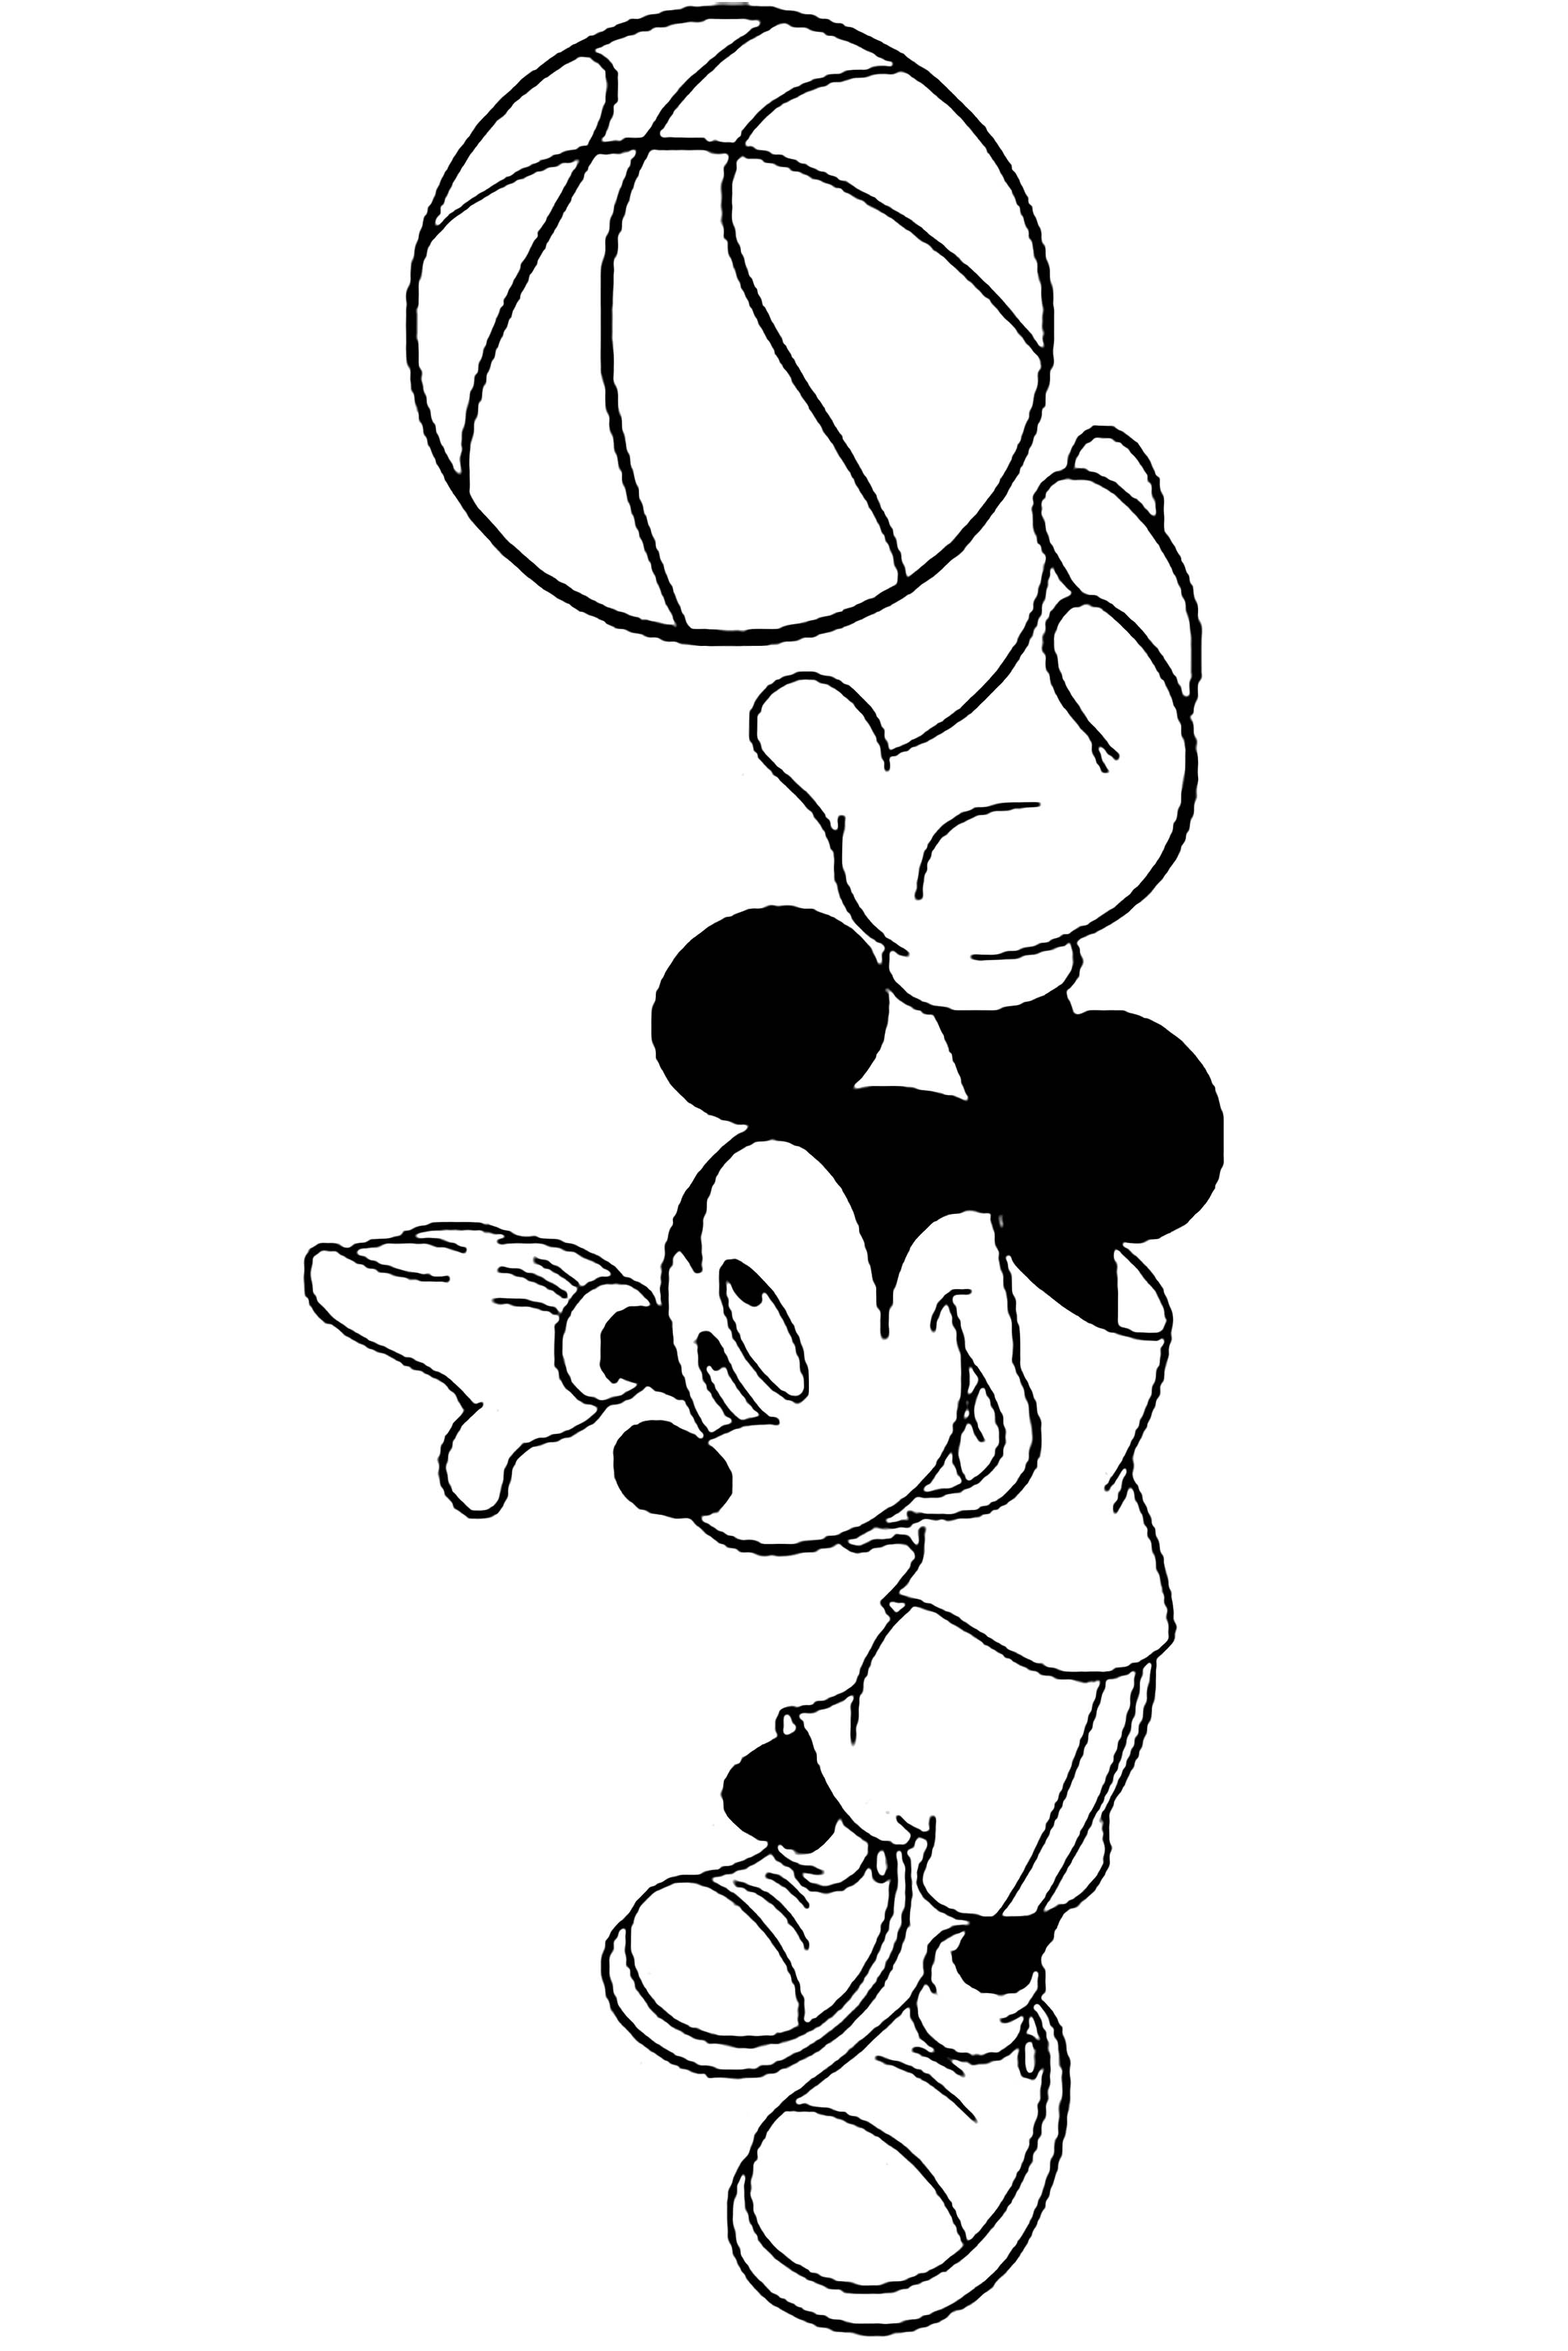 Free Basketball Coloring Pages To Print